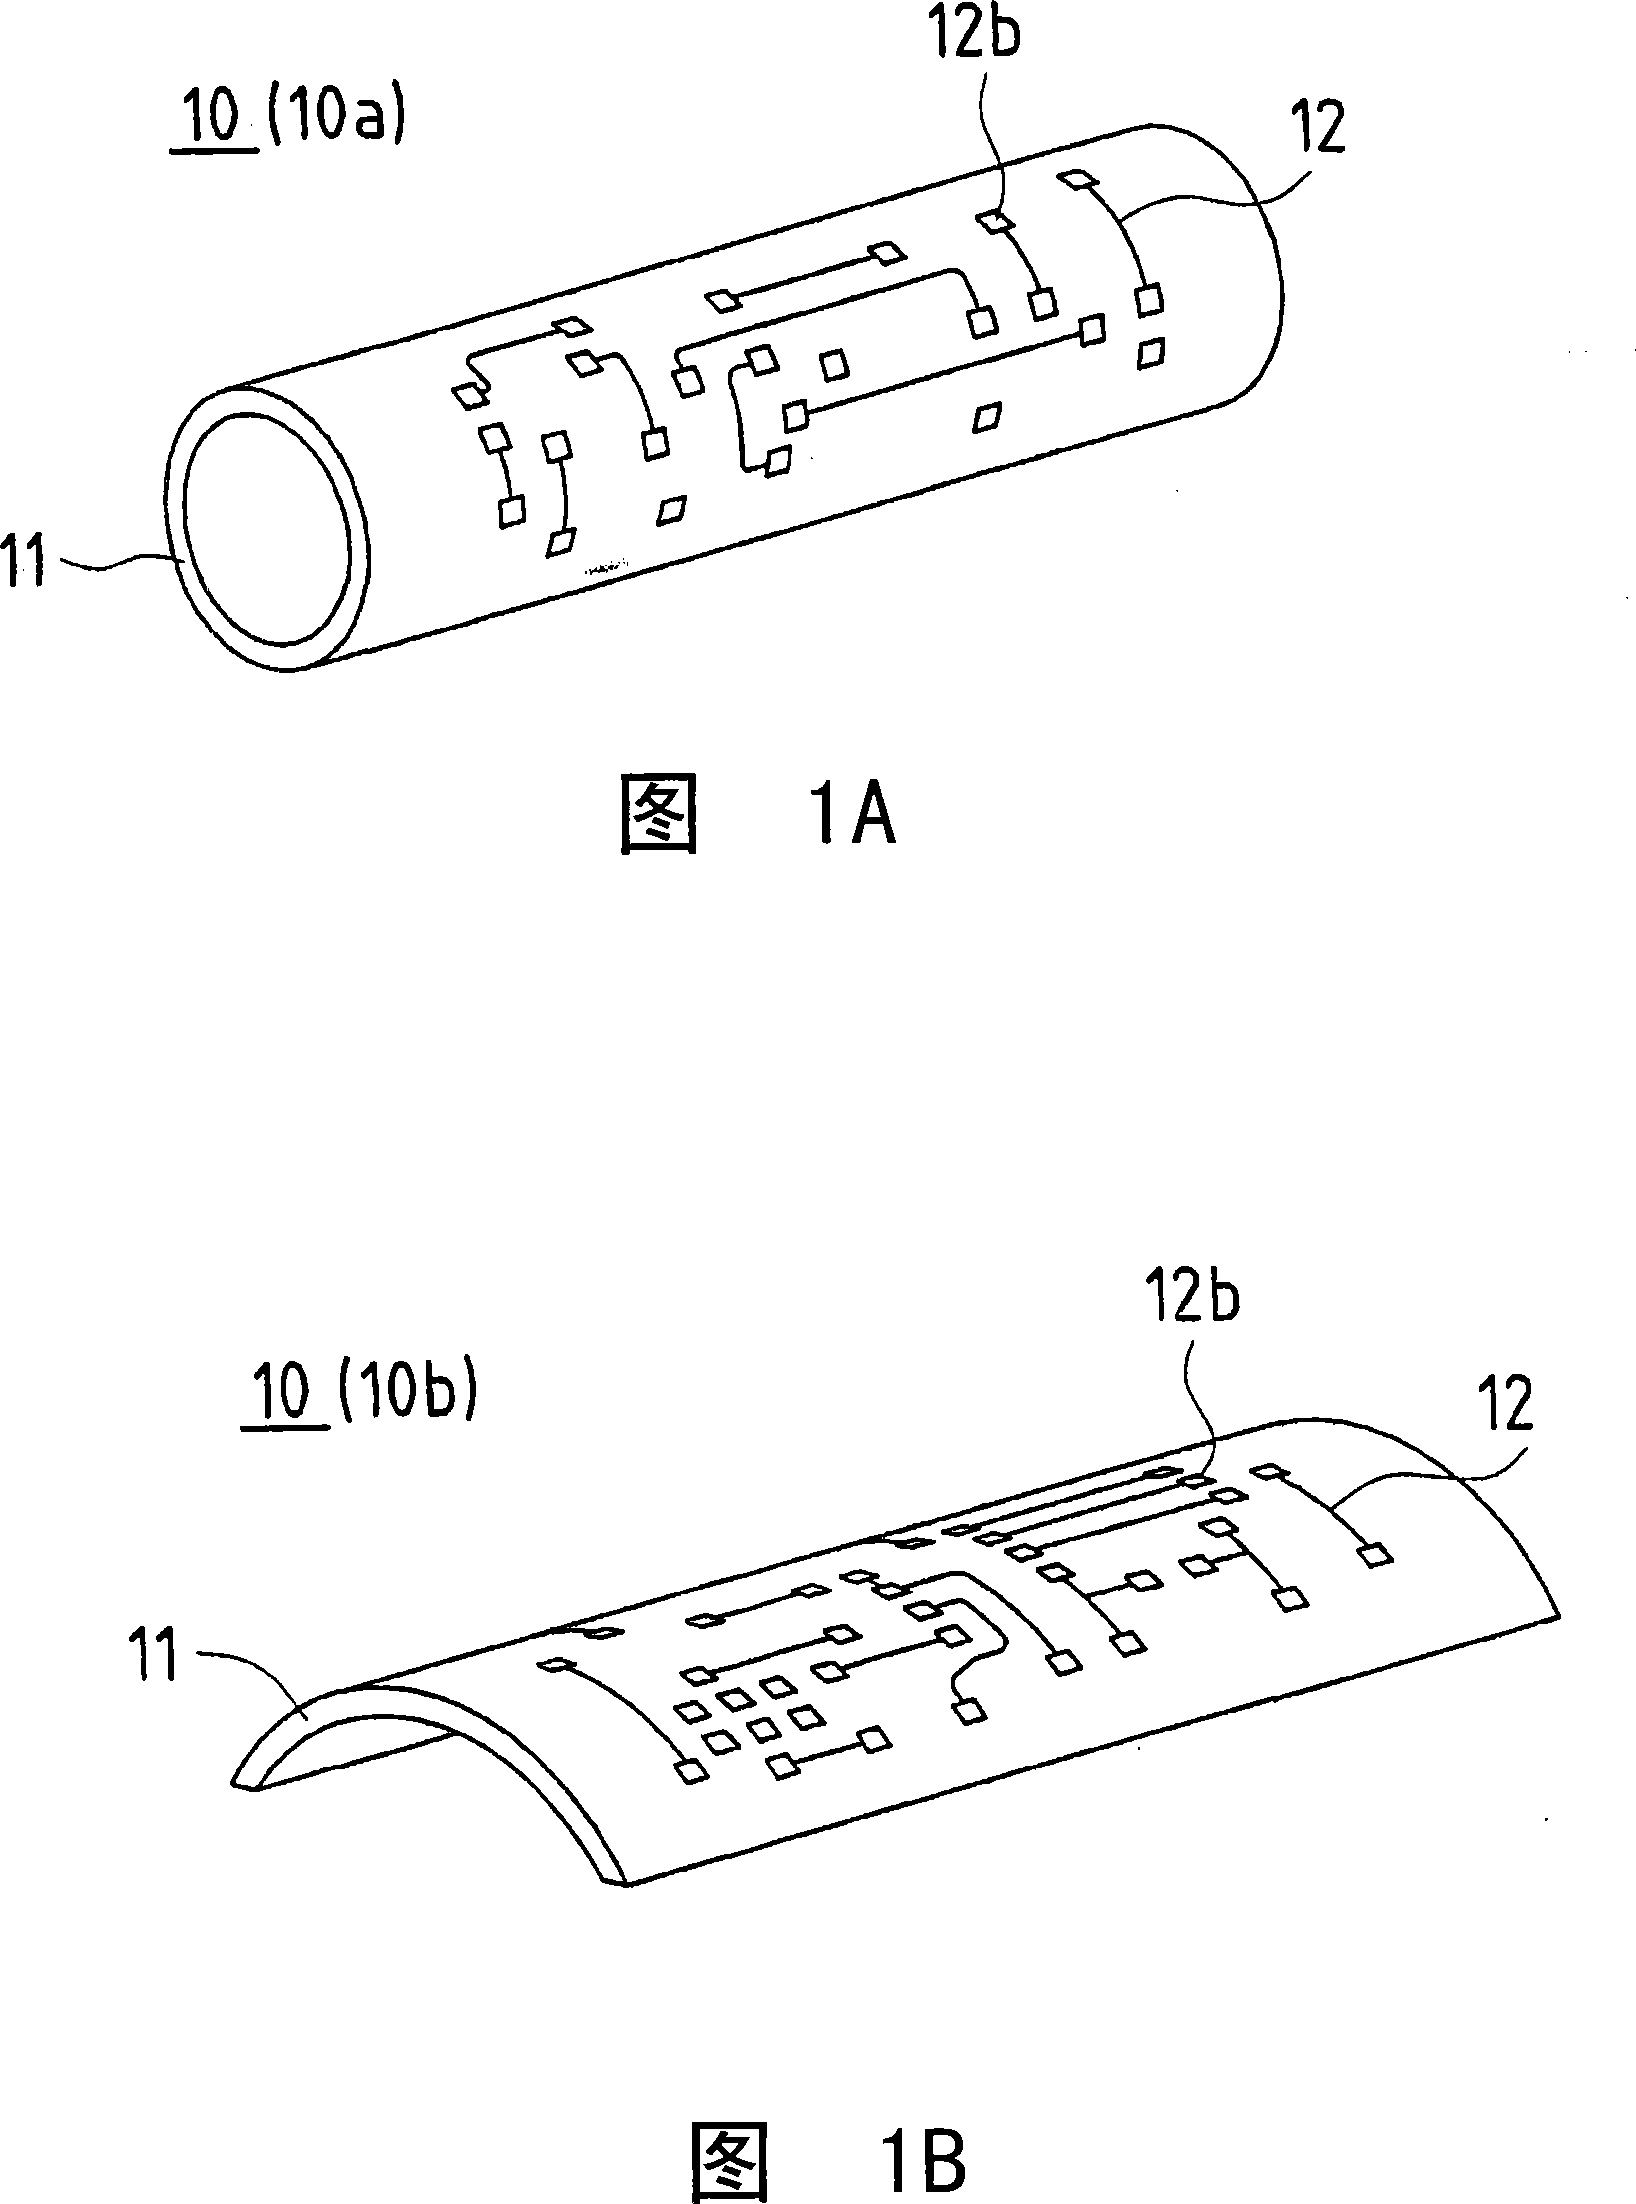 Printed wiring board manufacturing apparatus, printed wiring board, method for manufacturing printed wiring board, and electronic device